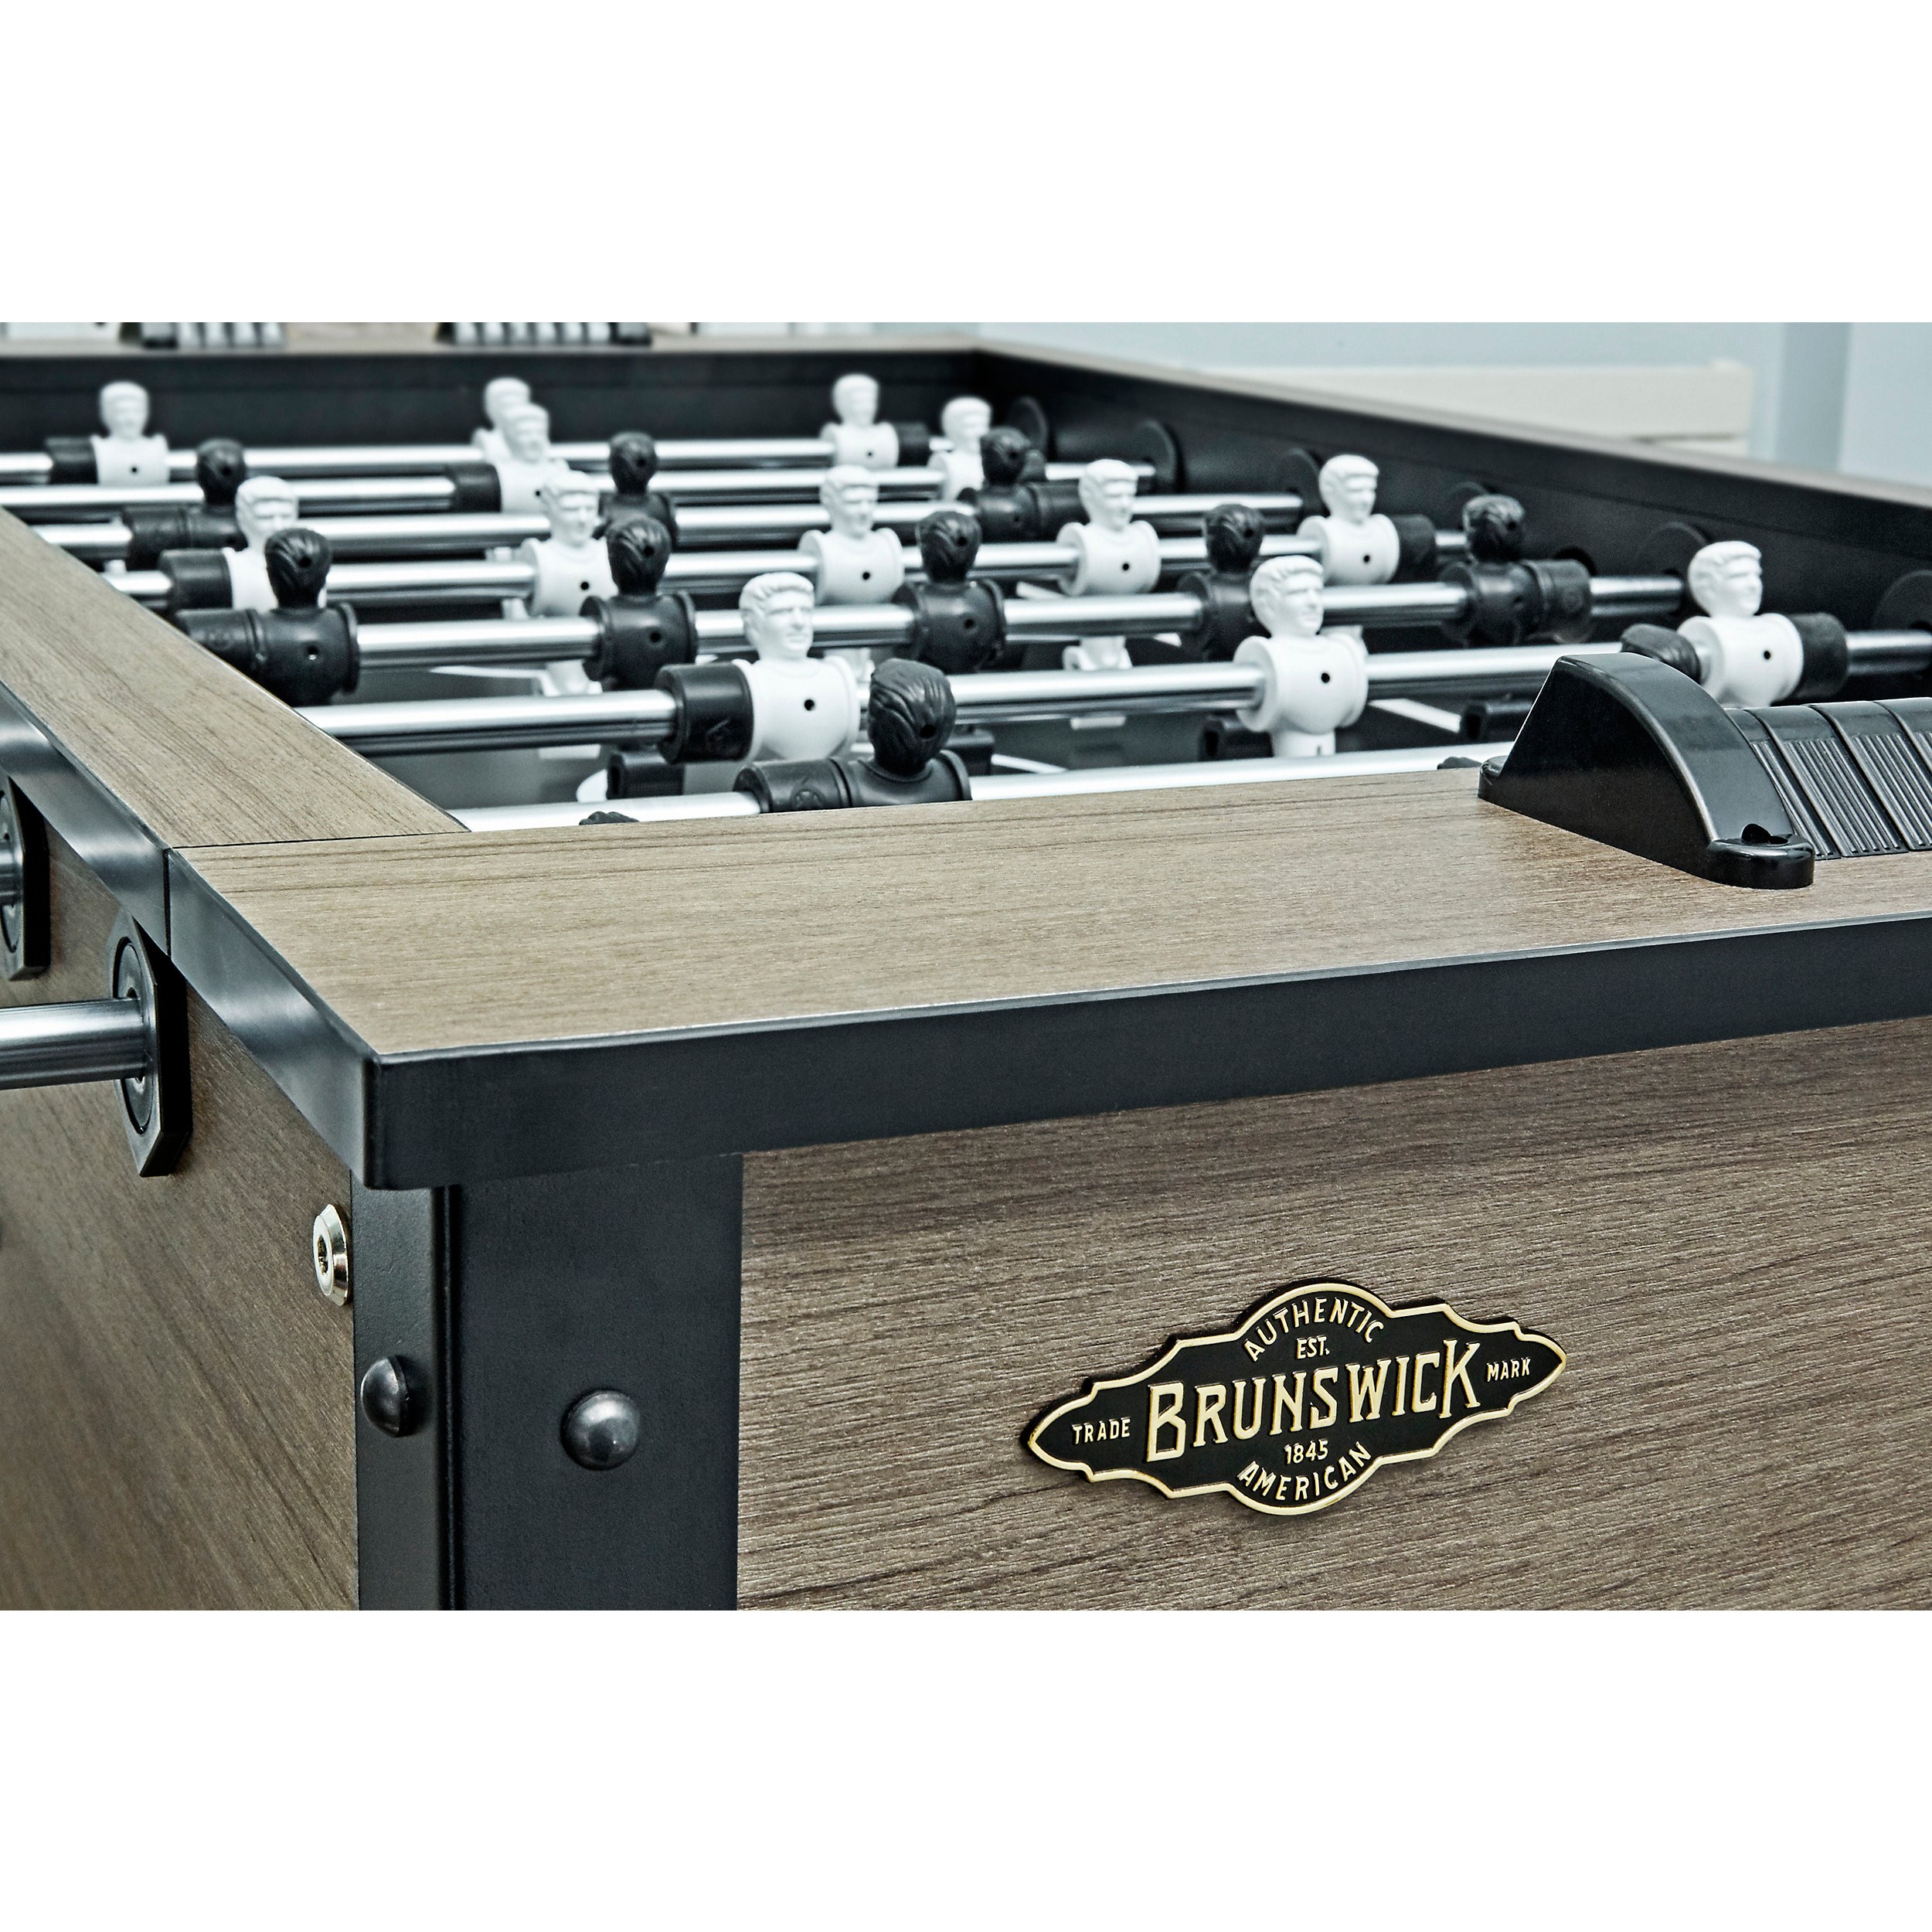 Solid wood foosball table decoration jacques garcia 3